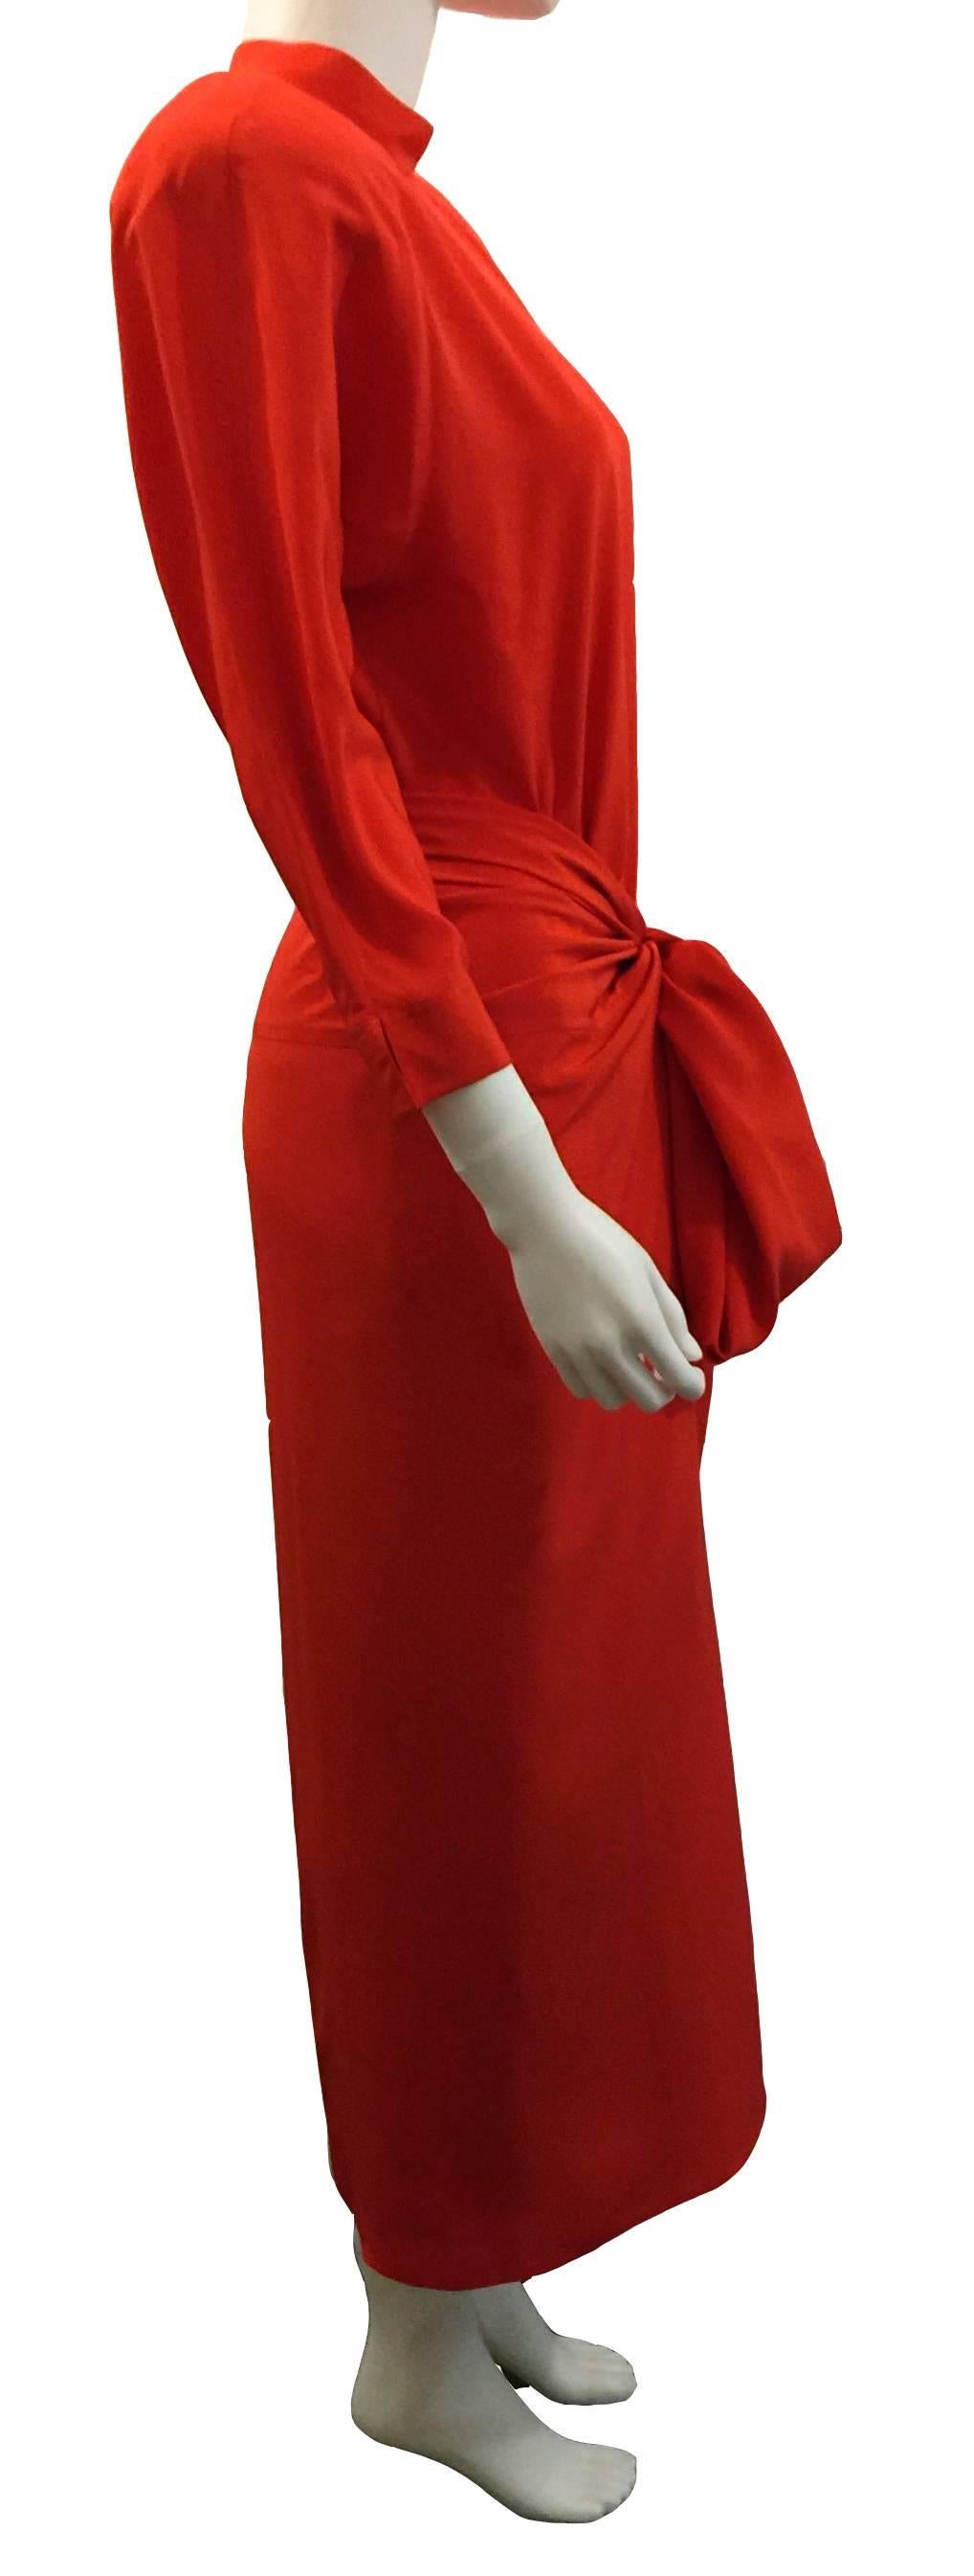 Gianfranco Ferré Vintage Dress.  Beautiful two-piece Red Dress 100% Pure Silk.  High Neckline with 3/4 sleeves.  Button detail with zip fastening on back.  Shoulder Pads can be removed if desired.  Size 40.  Designed by Gianfranco Ferré.  Very